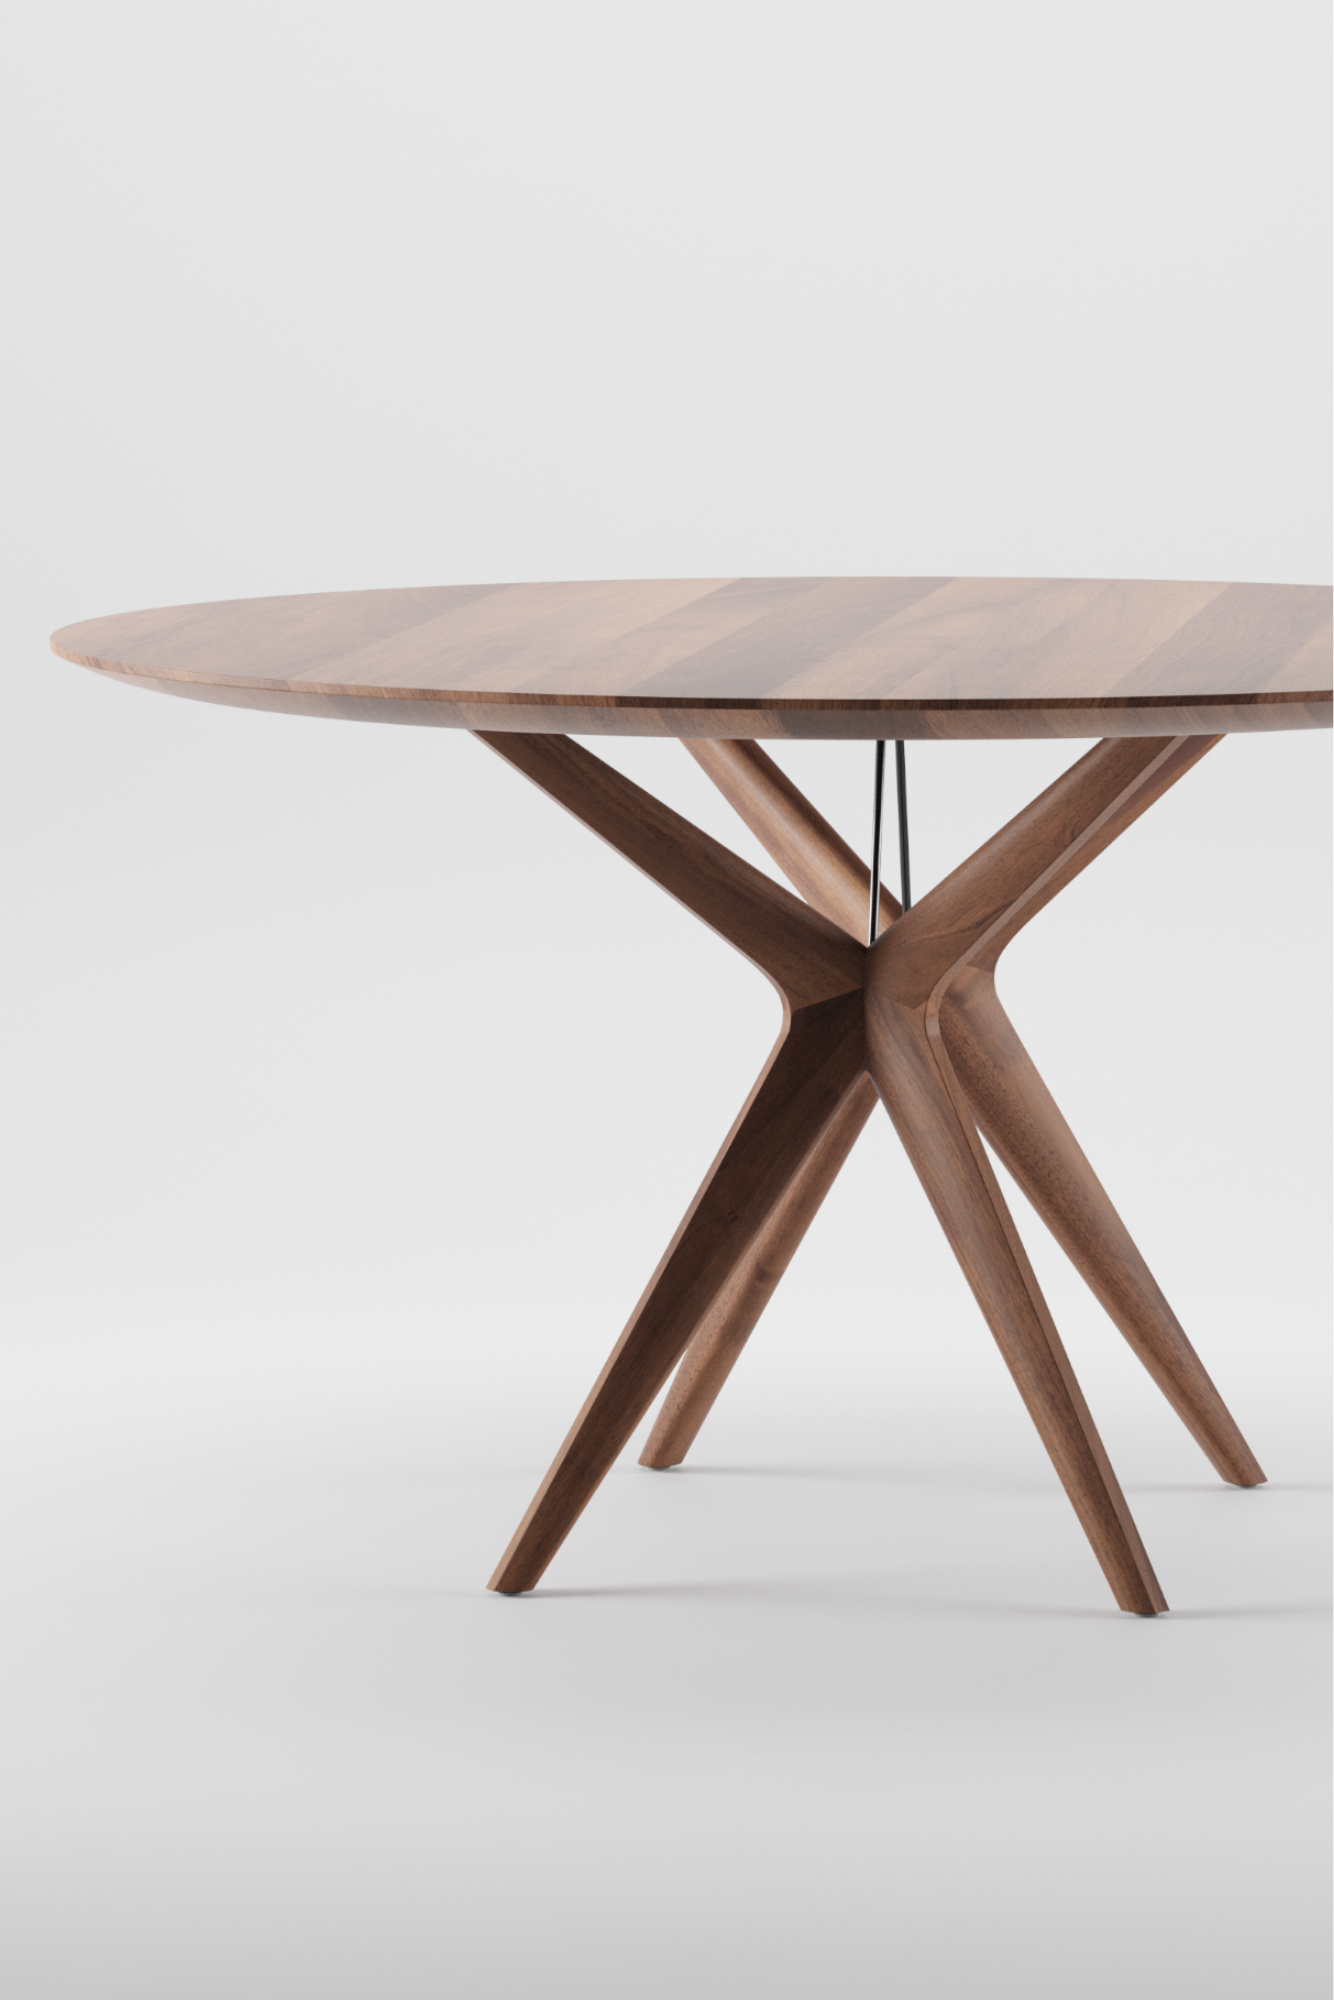 The Lakri Dining Table in Walnut by Artisan detail photo